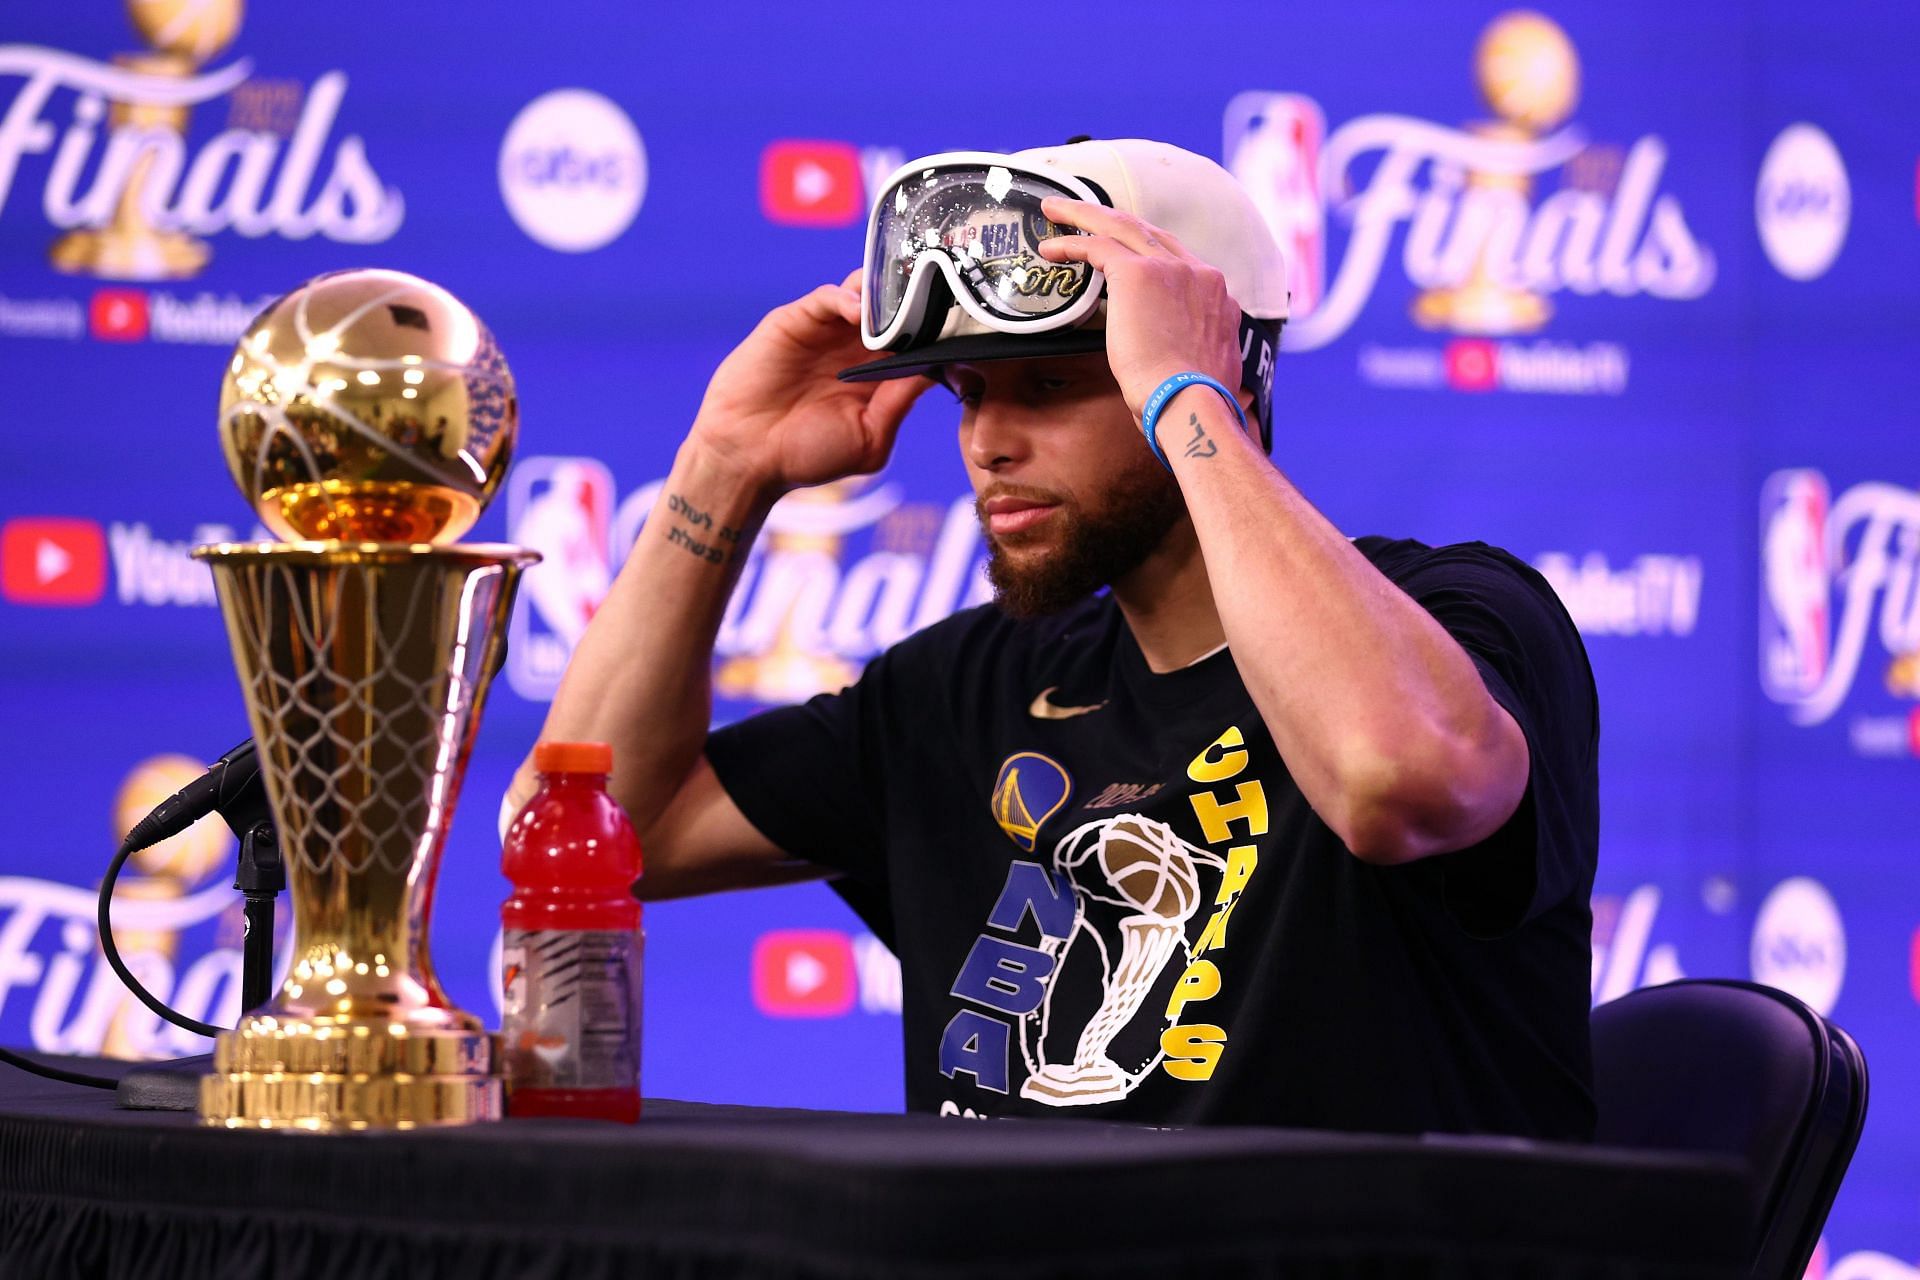 Stephen Curry at the Finals postgame press conference.